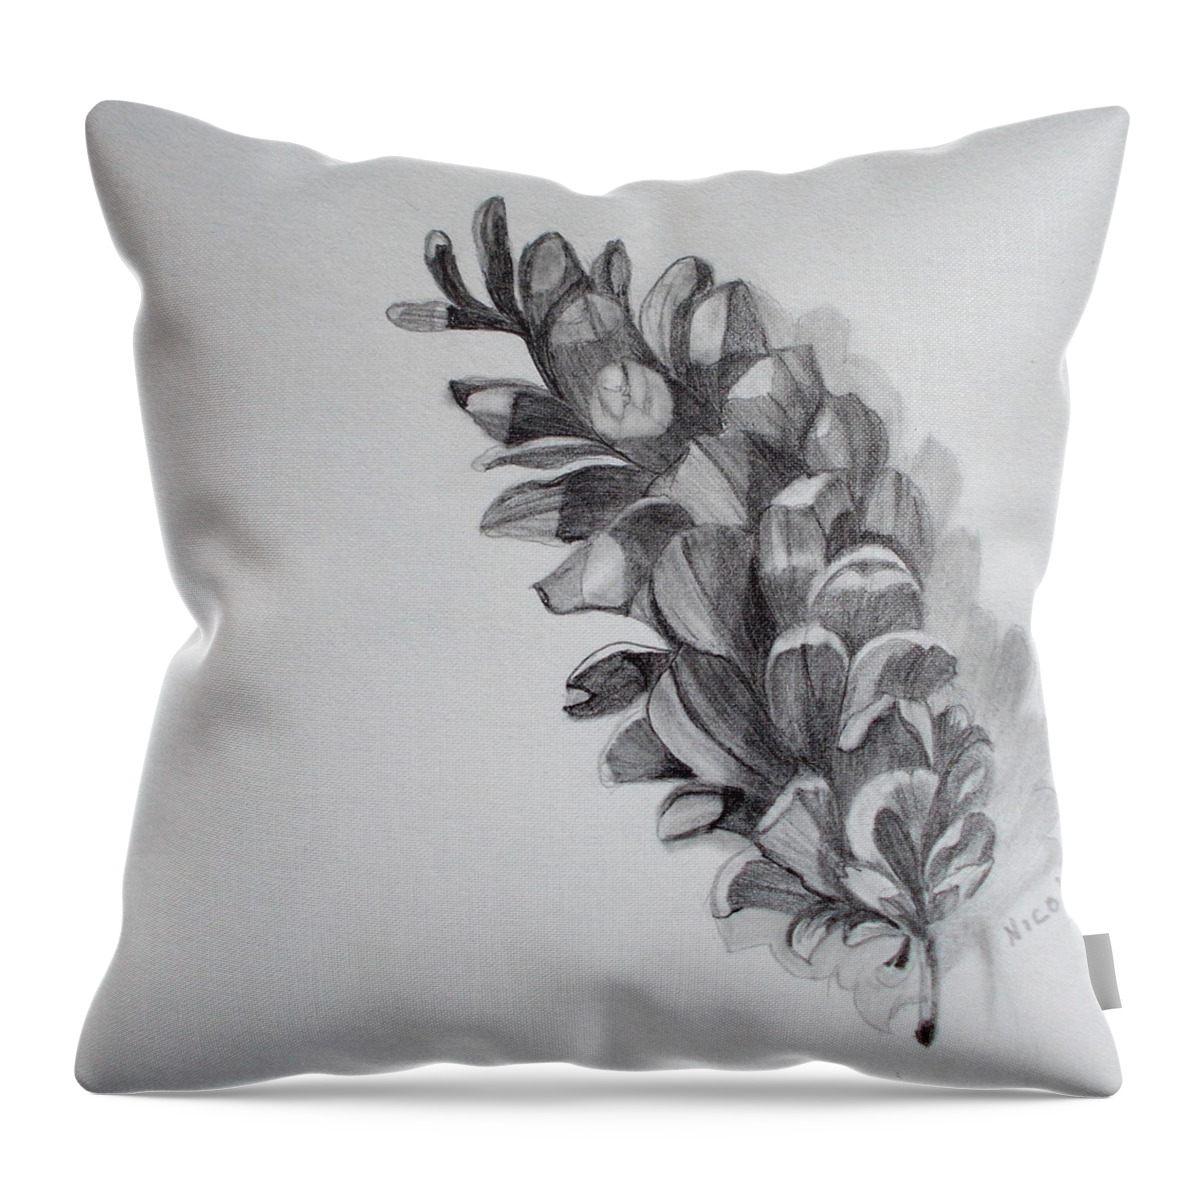 Pinecone Throw Pillow featuring the drawing Pinecone by Nicole Curreri